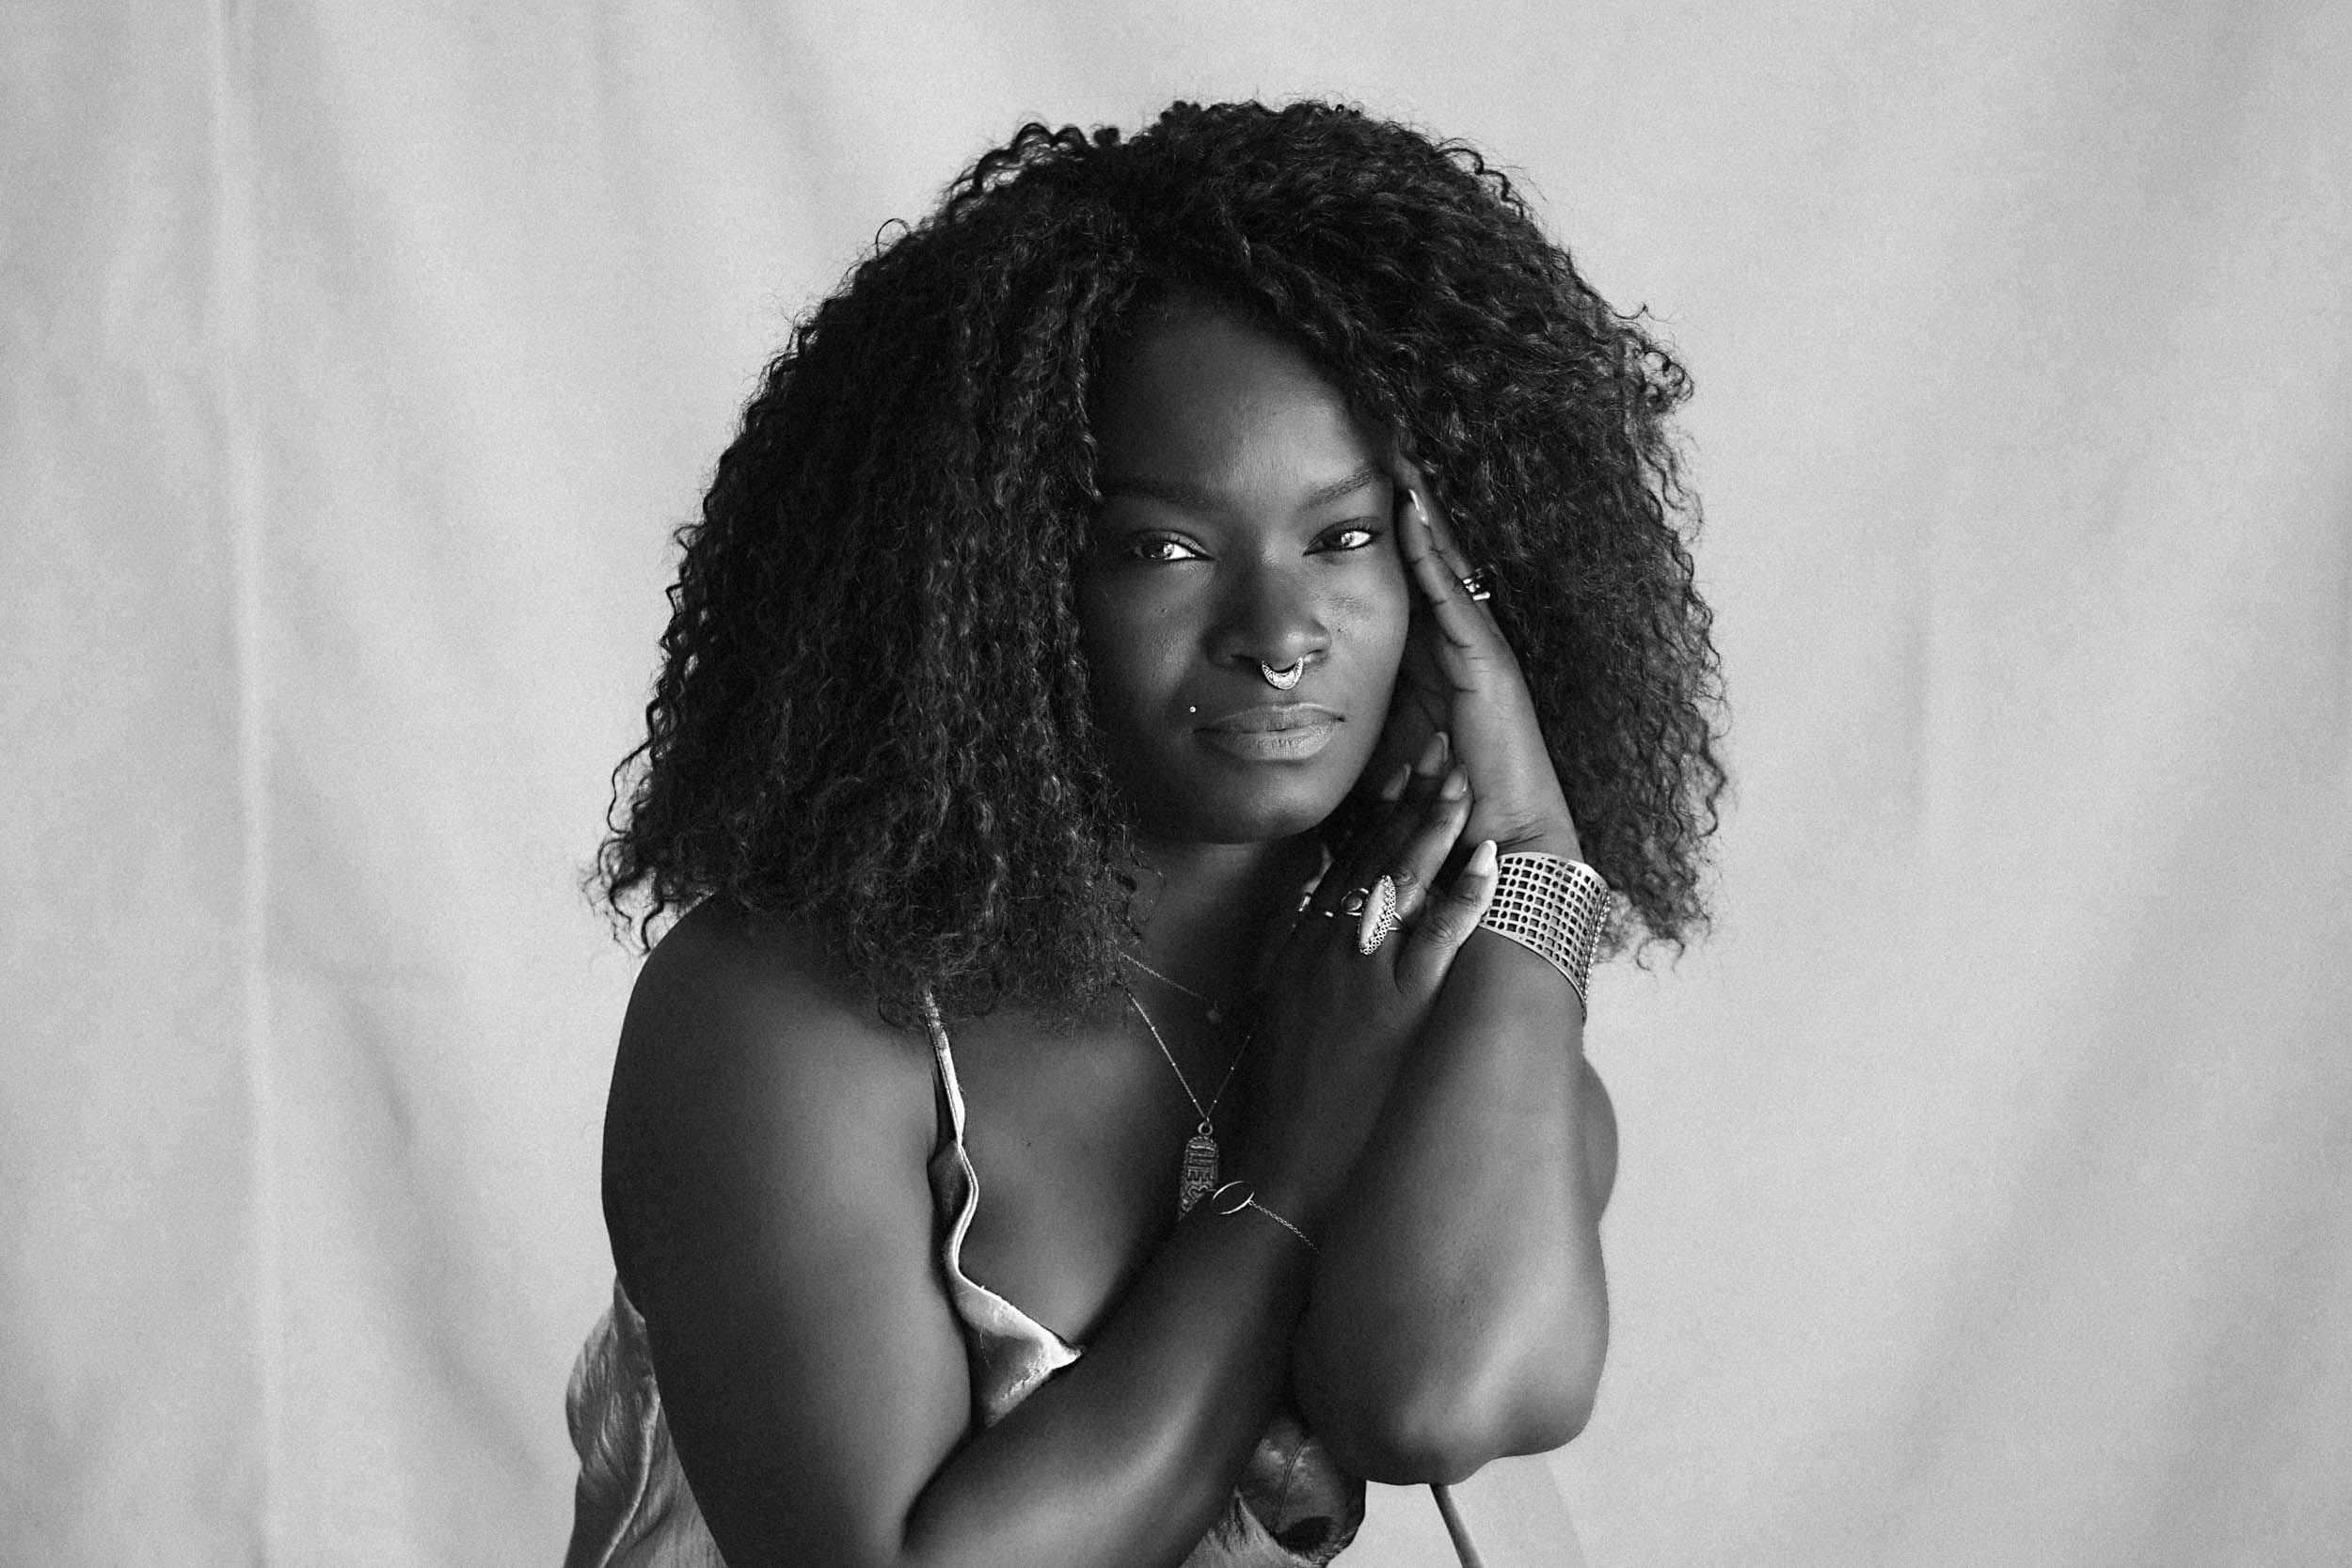 black and white editorial portrait of a black woman in a photo studio